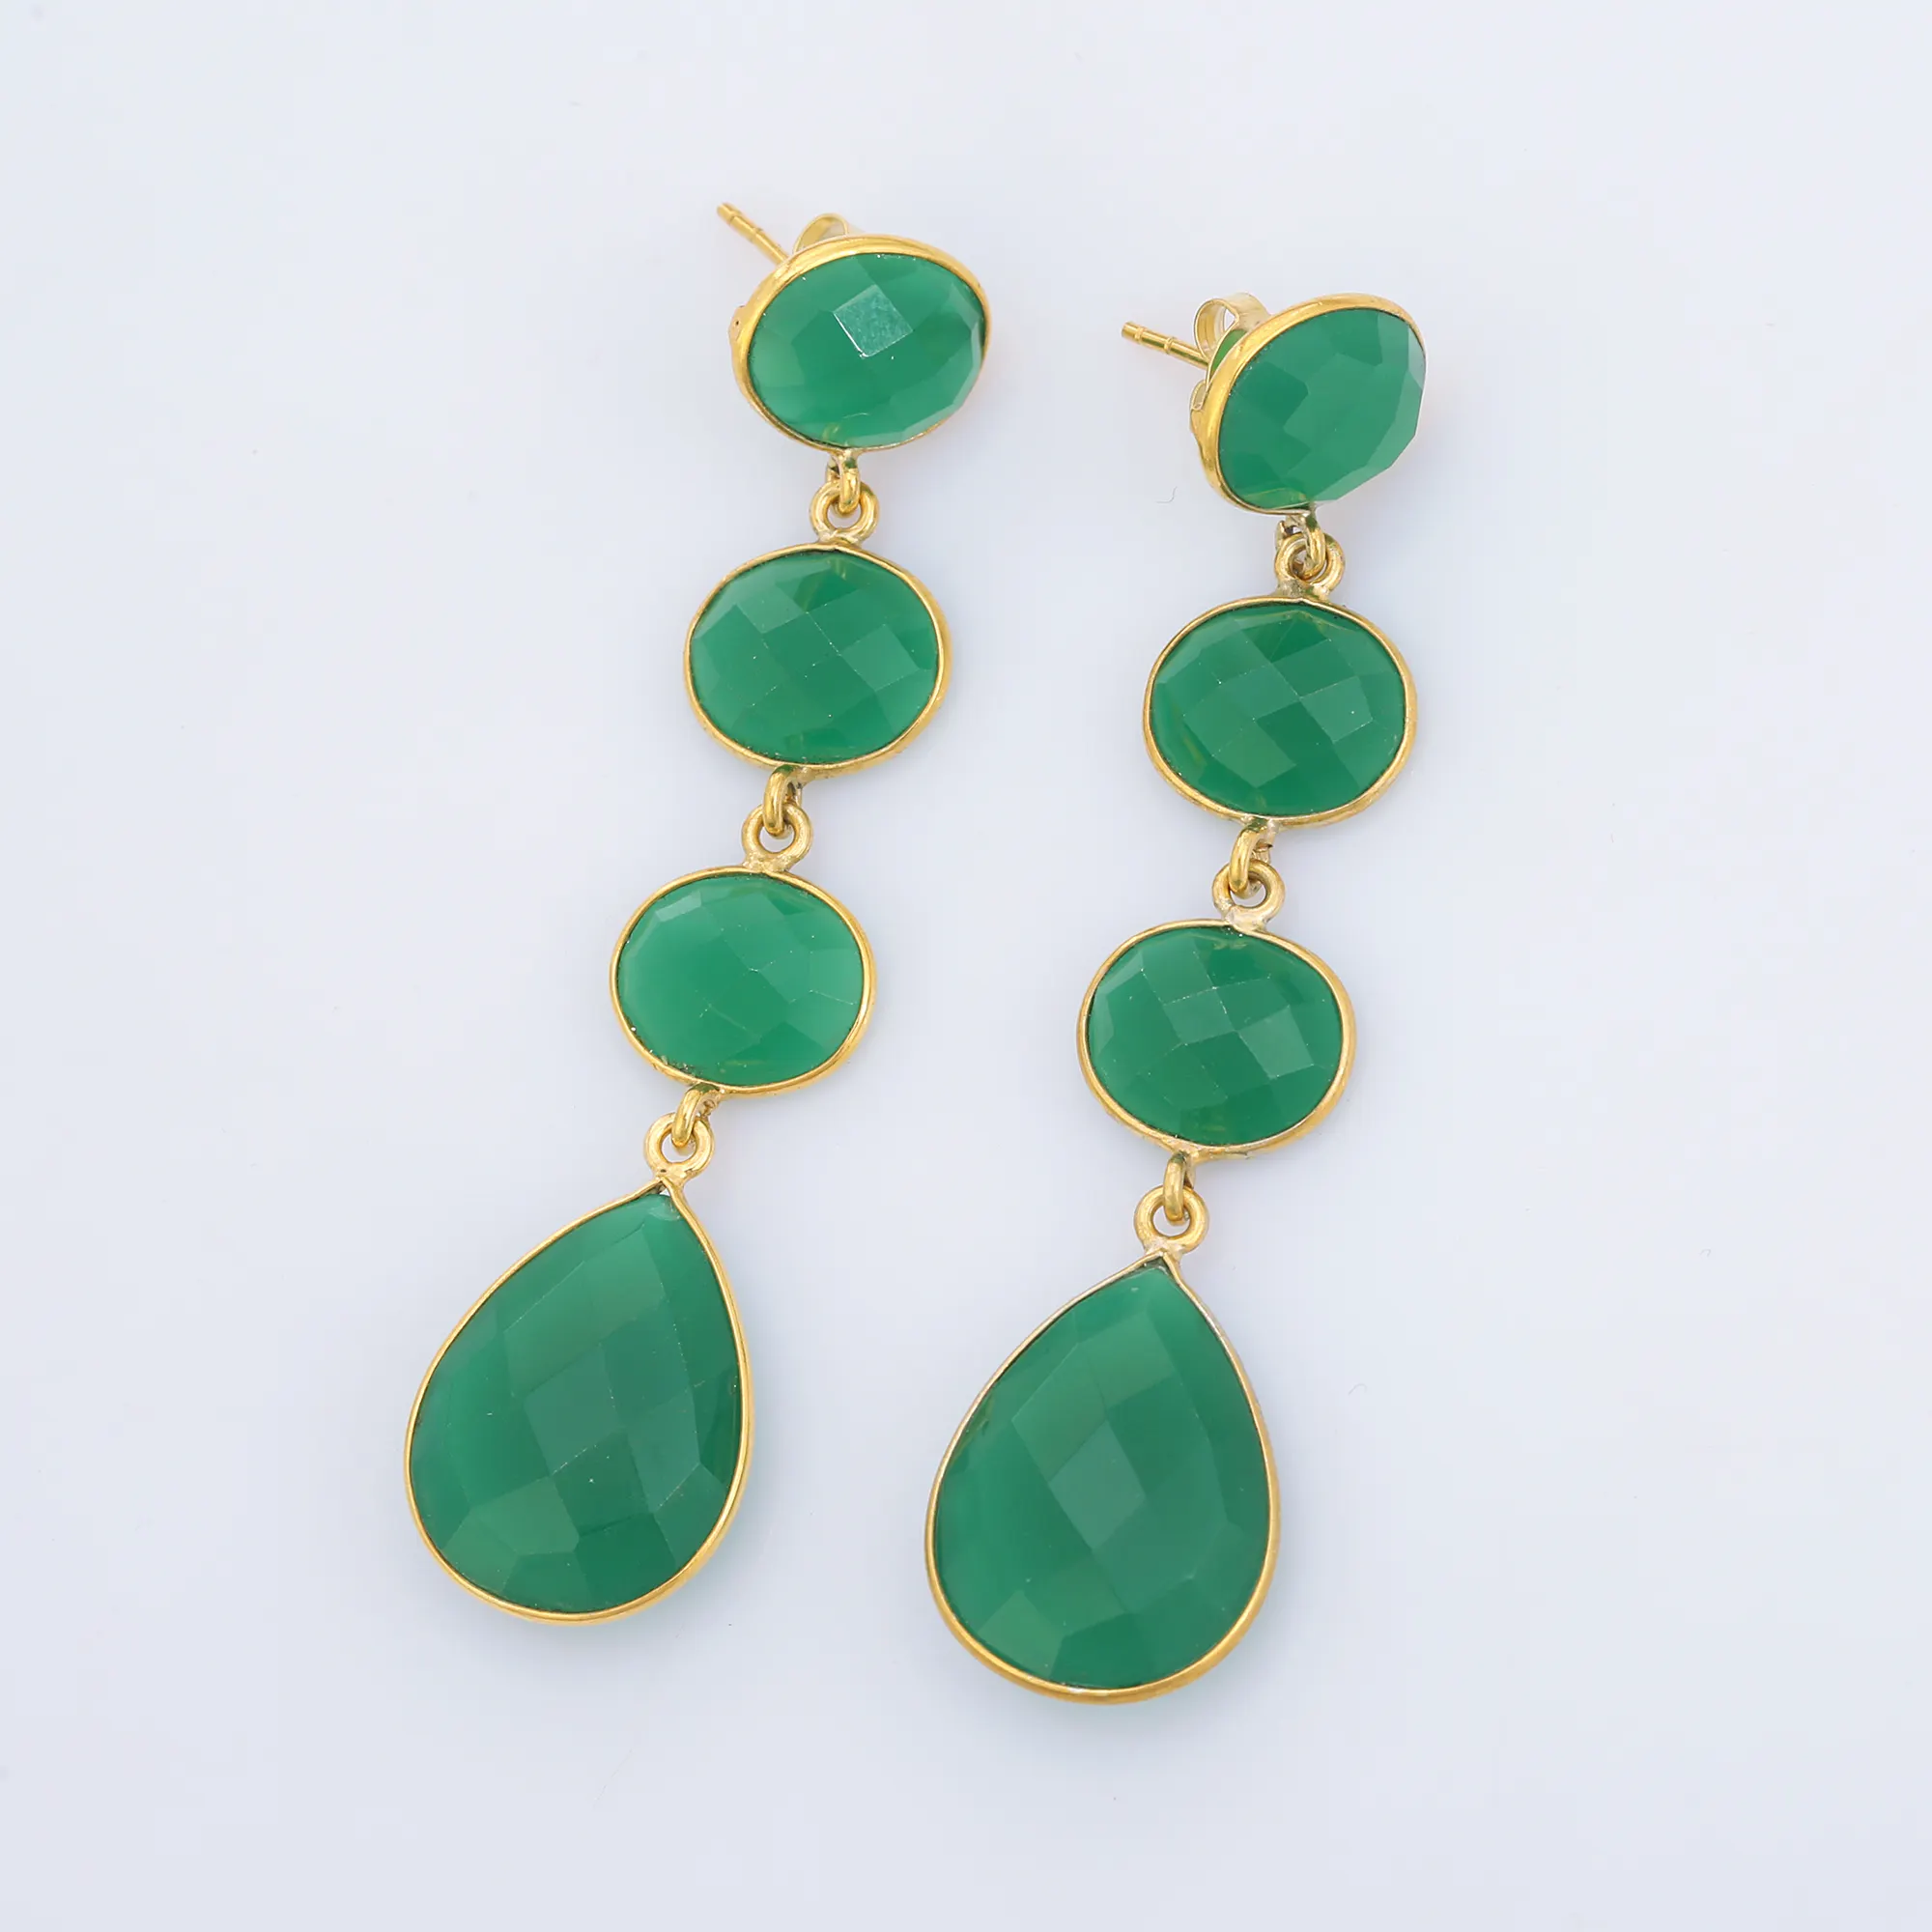 Amazing Green Onyx Long Earring Gold Plated Lovely Drop Earring for Girls and Women available at Affordable Price in India